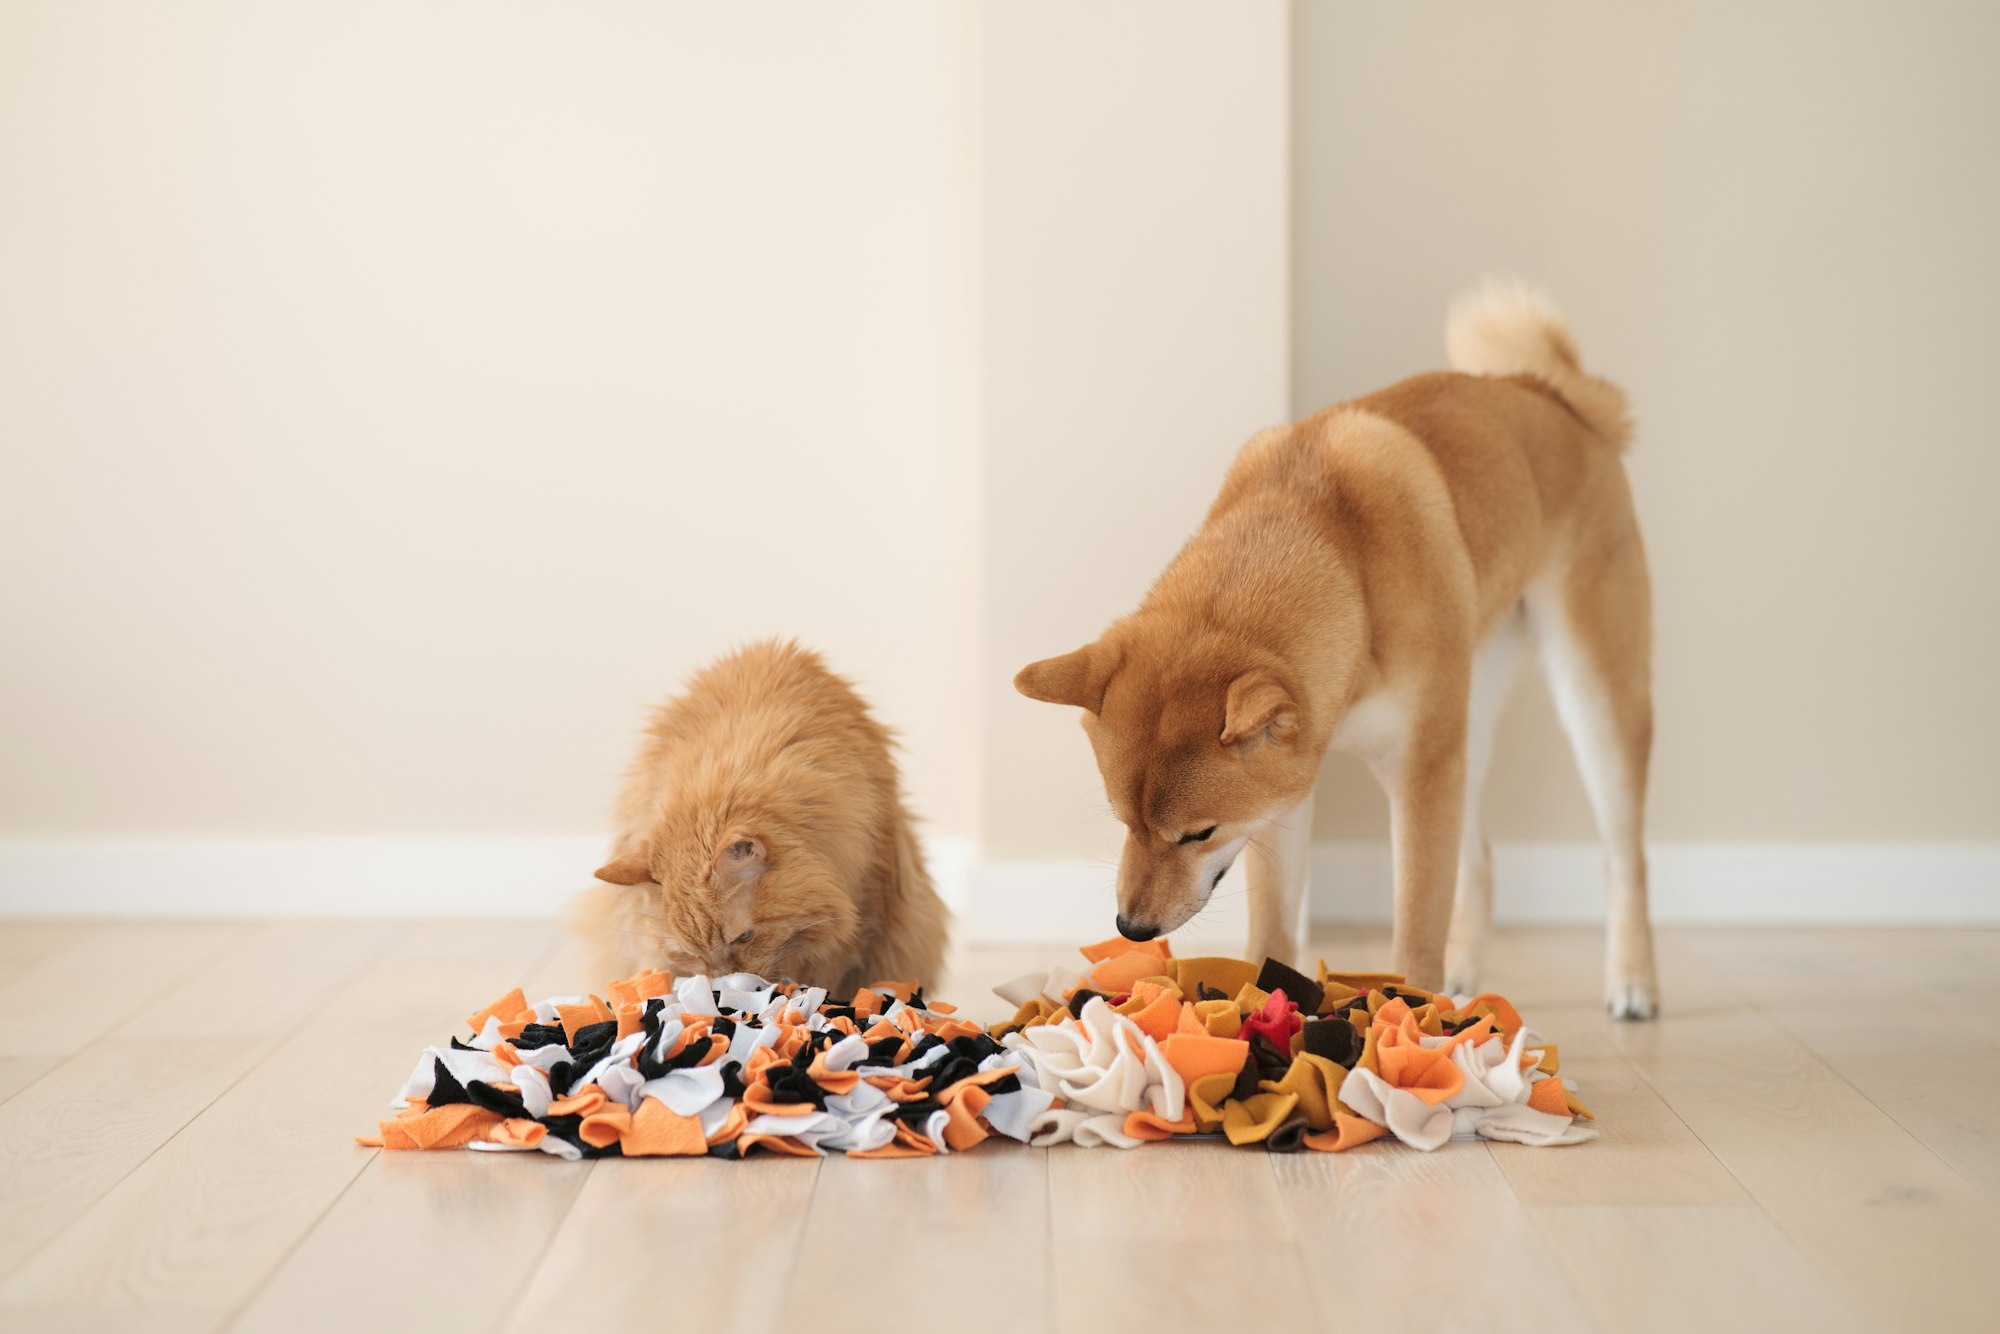 Competition between a cat and a dog. Finding treats in homemade educational snuffle mats for pets.